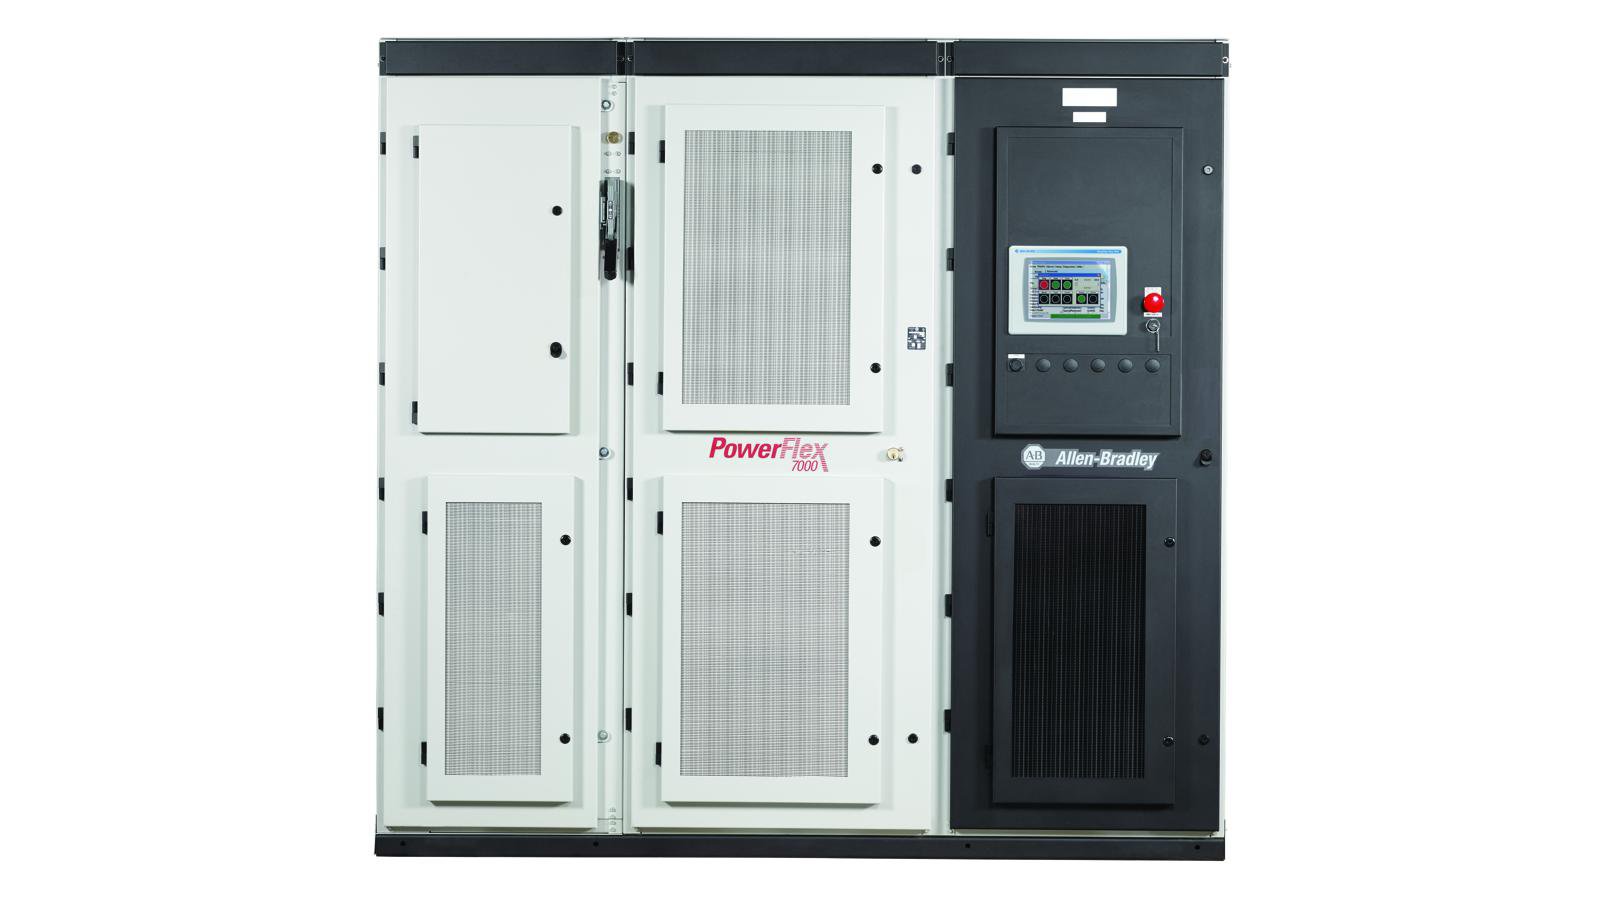 PowerFlex® 7000 Medium Voltage AC Drives | Air- or liquid-cooled drives available from 200 Hp to 34,000 Hp and for supply voltages of 2.3.6.6 kV | Control speed, torque, direction, starting and stopping of standard asynchronous or synchronous AC motors, optimal for regenerative applications